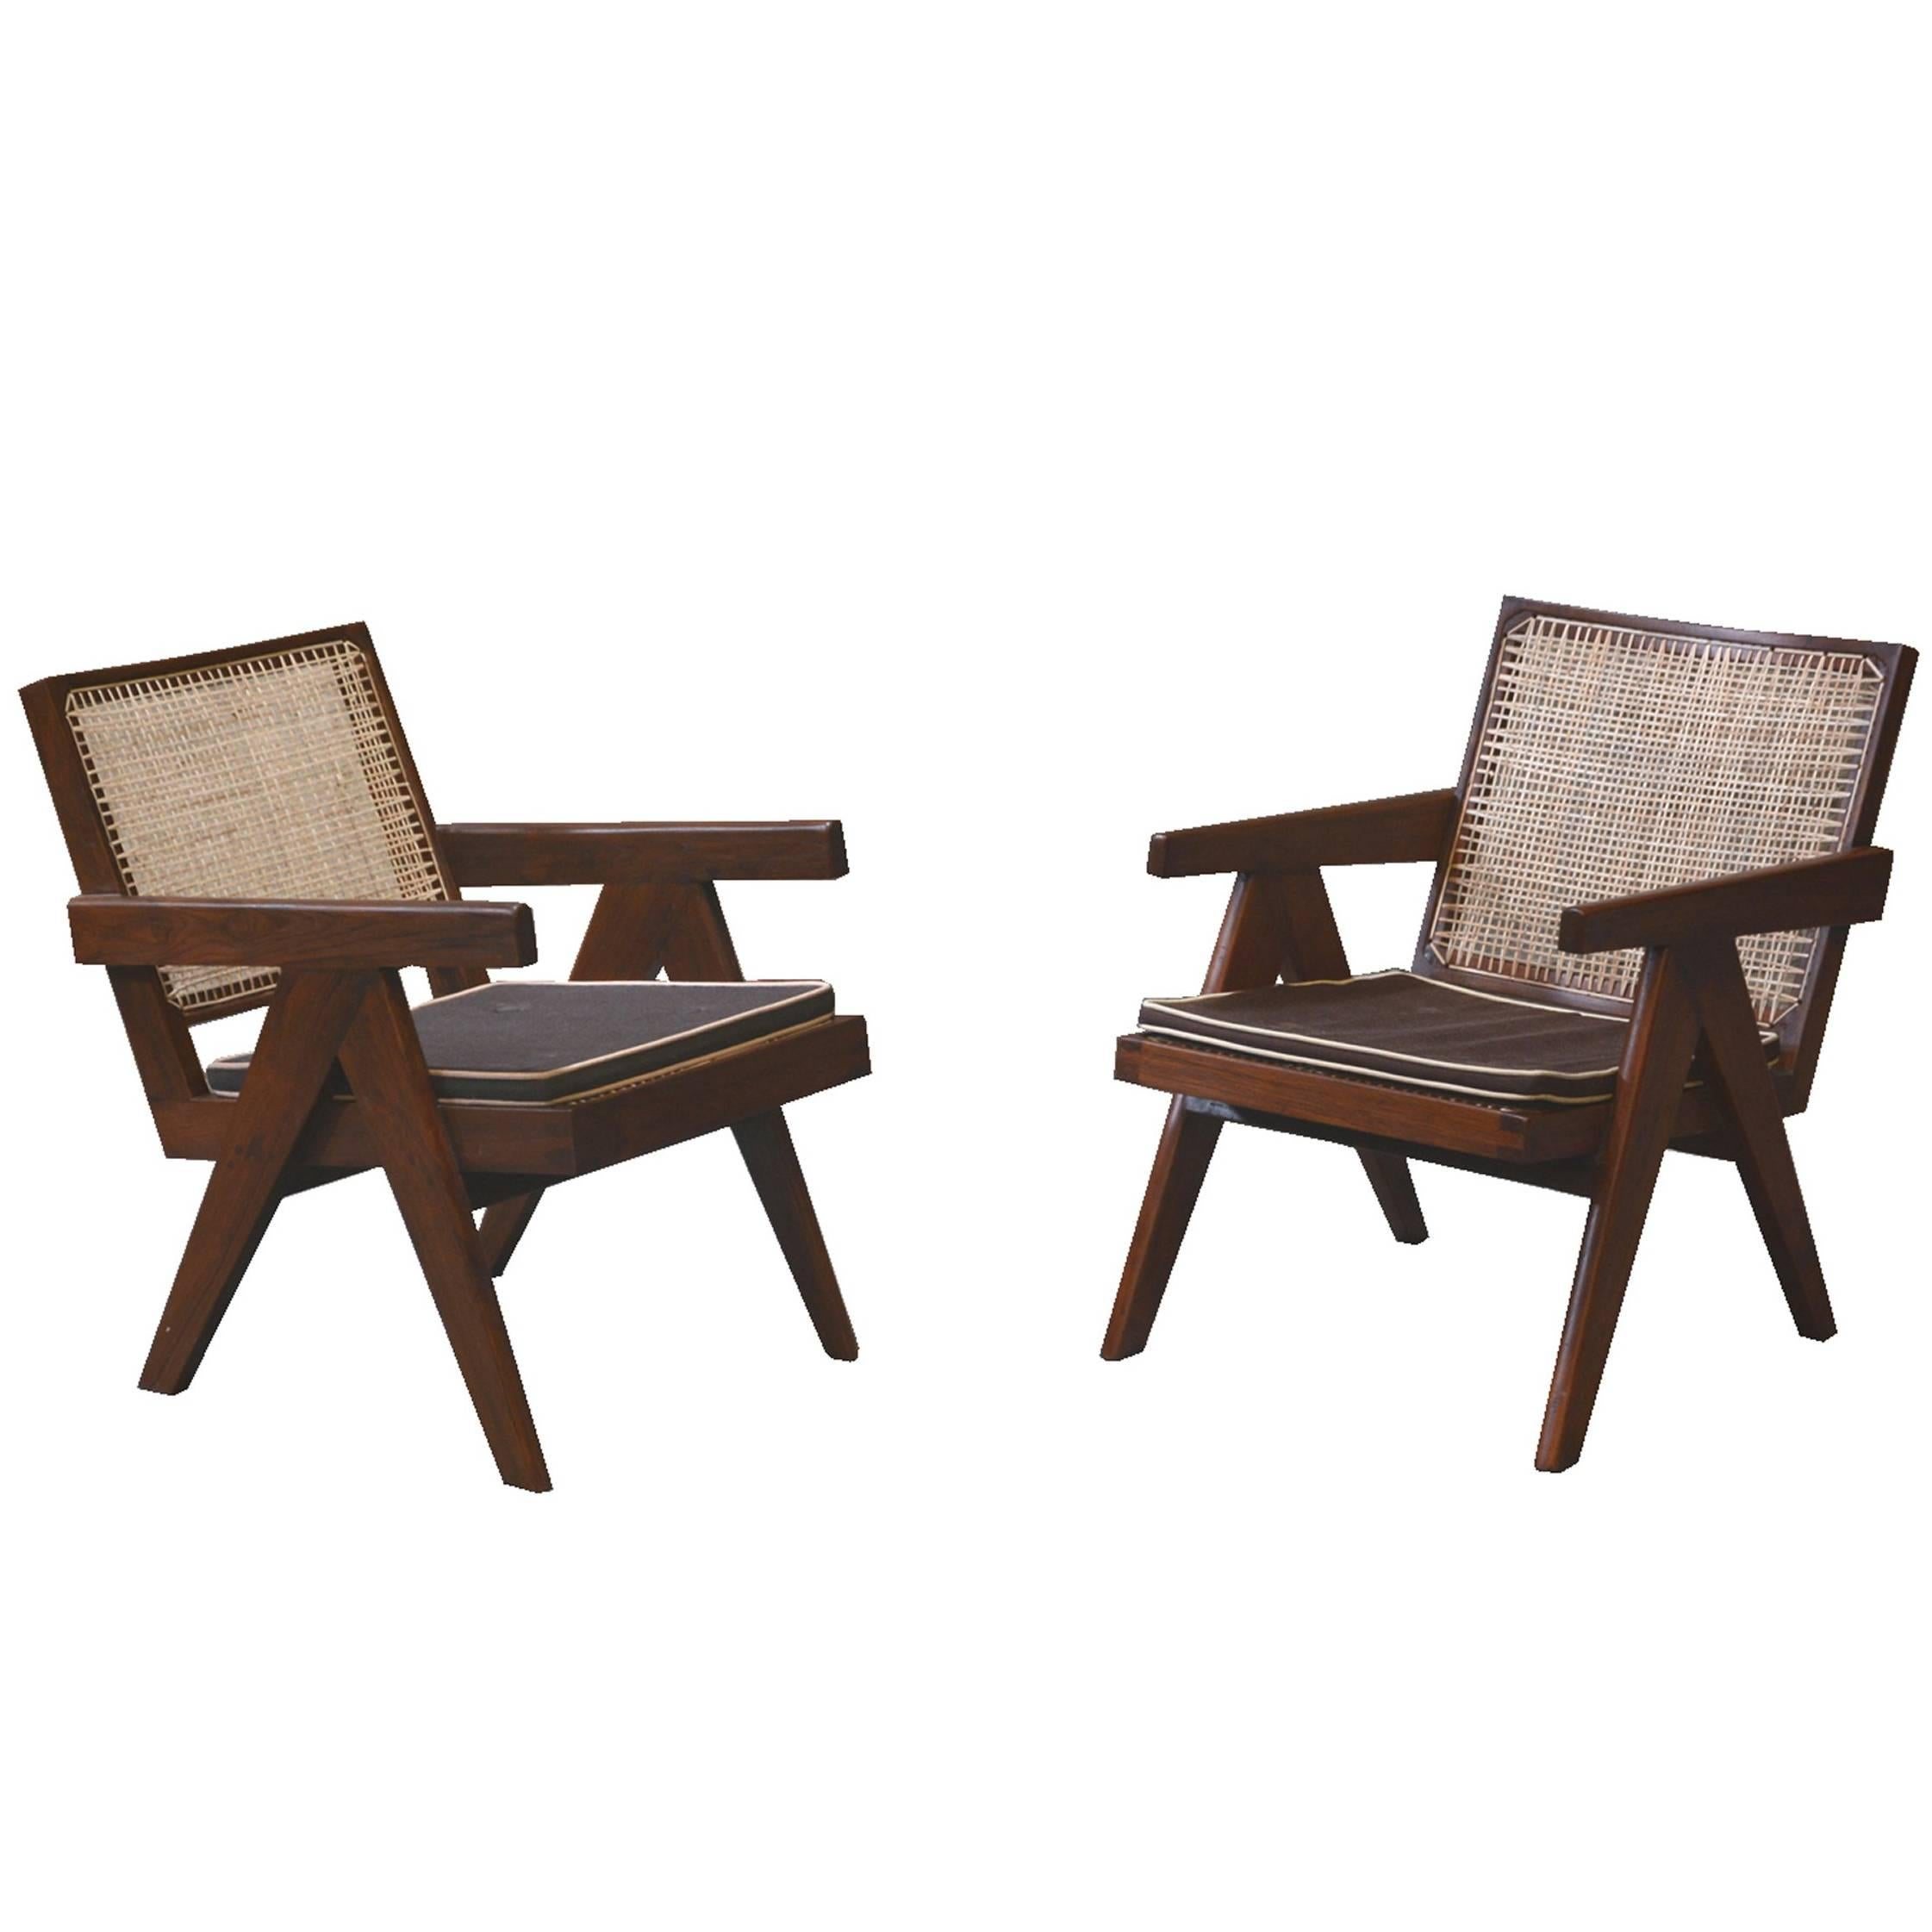 Pierre Jeanneret Pair of Easy Armchairs, circa 1955